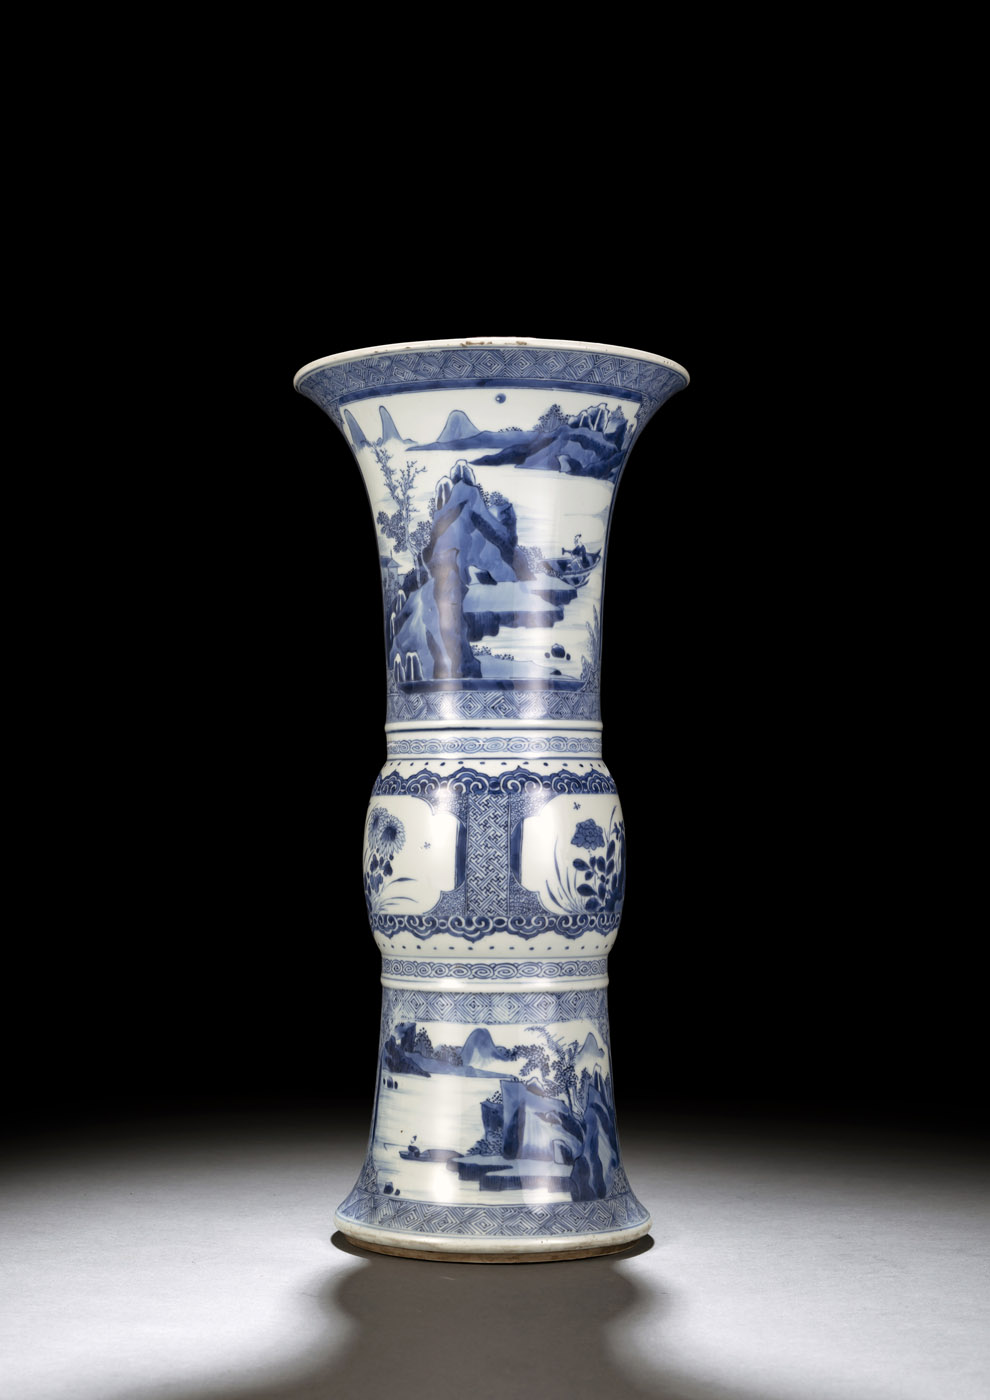 <b>A GU-SHAPED BLUE AND WHITE VASE WITH SCENES OF SEA LANDCAPES AND FLOWER MEDAILLONS</b>